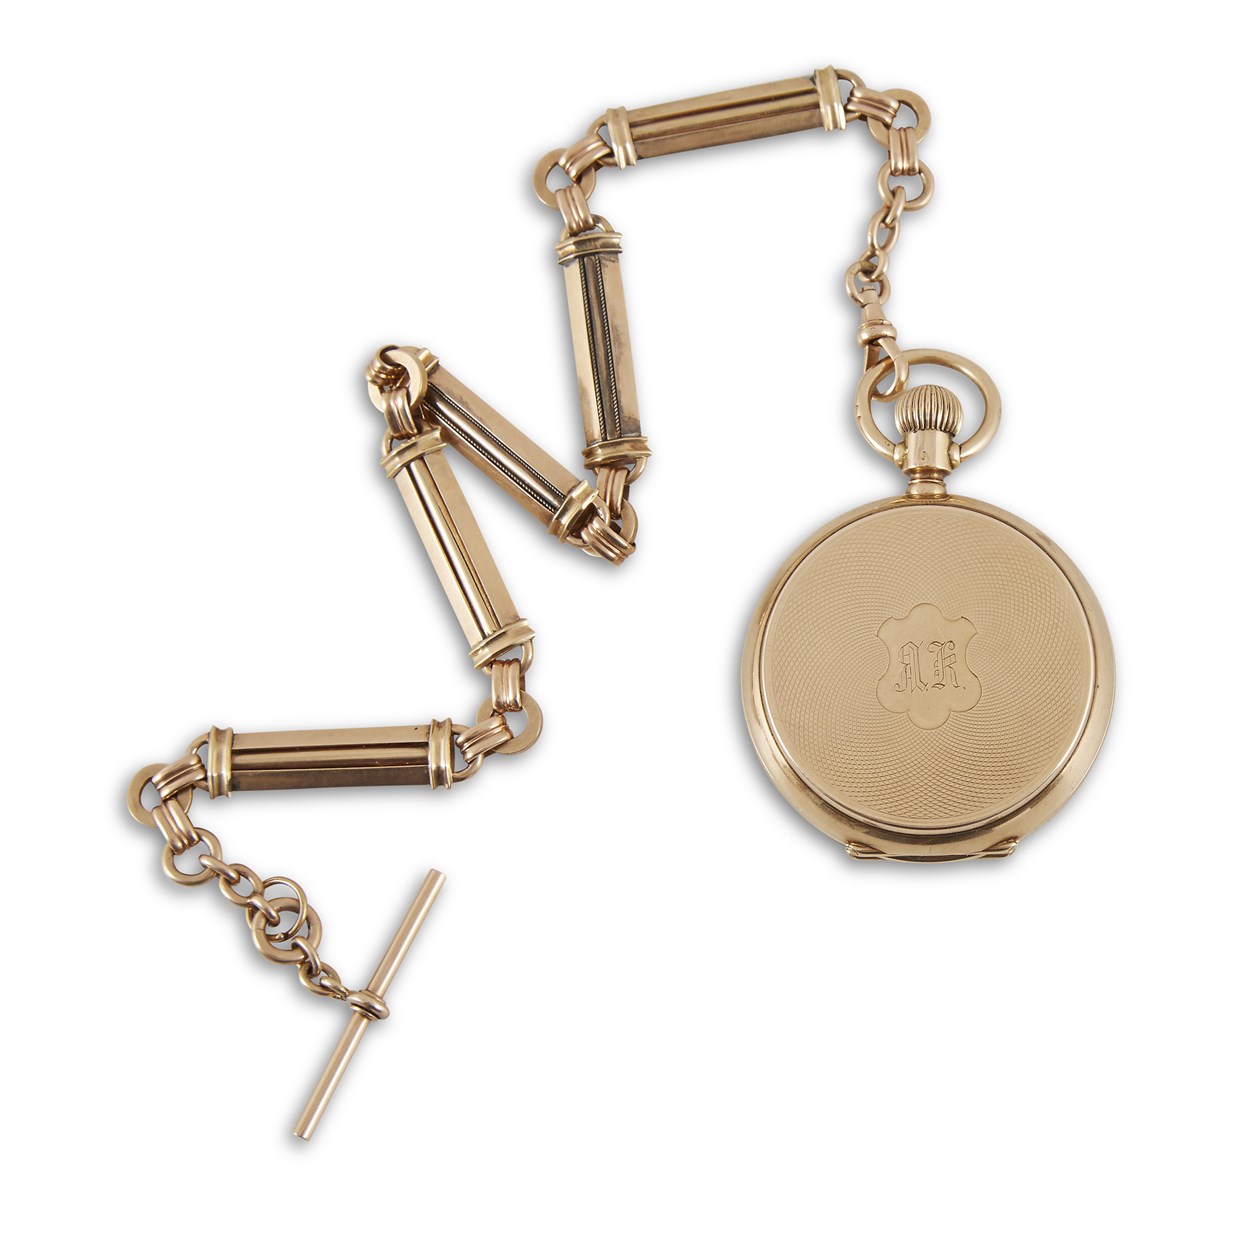 Lot 11 - A Swiss gold skeleton pocketwatch for the Russian market, with a Russian gold fob